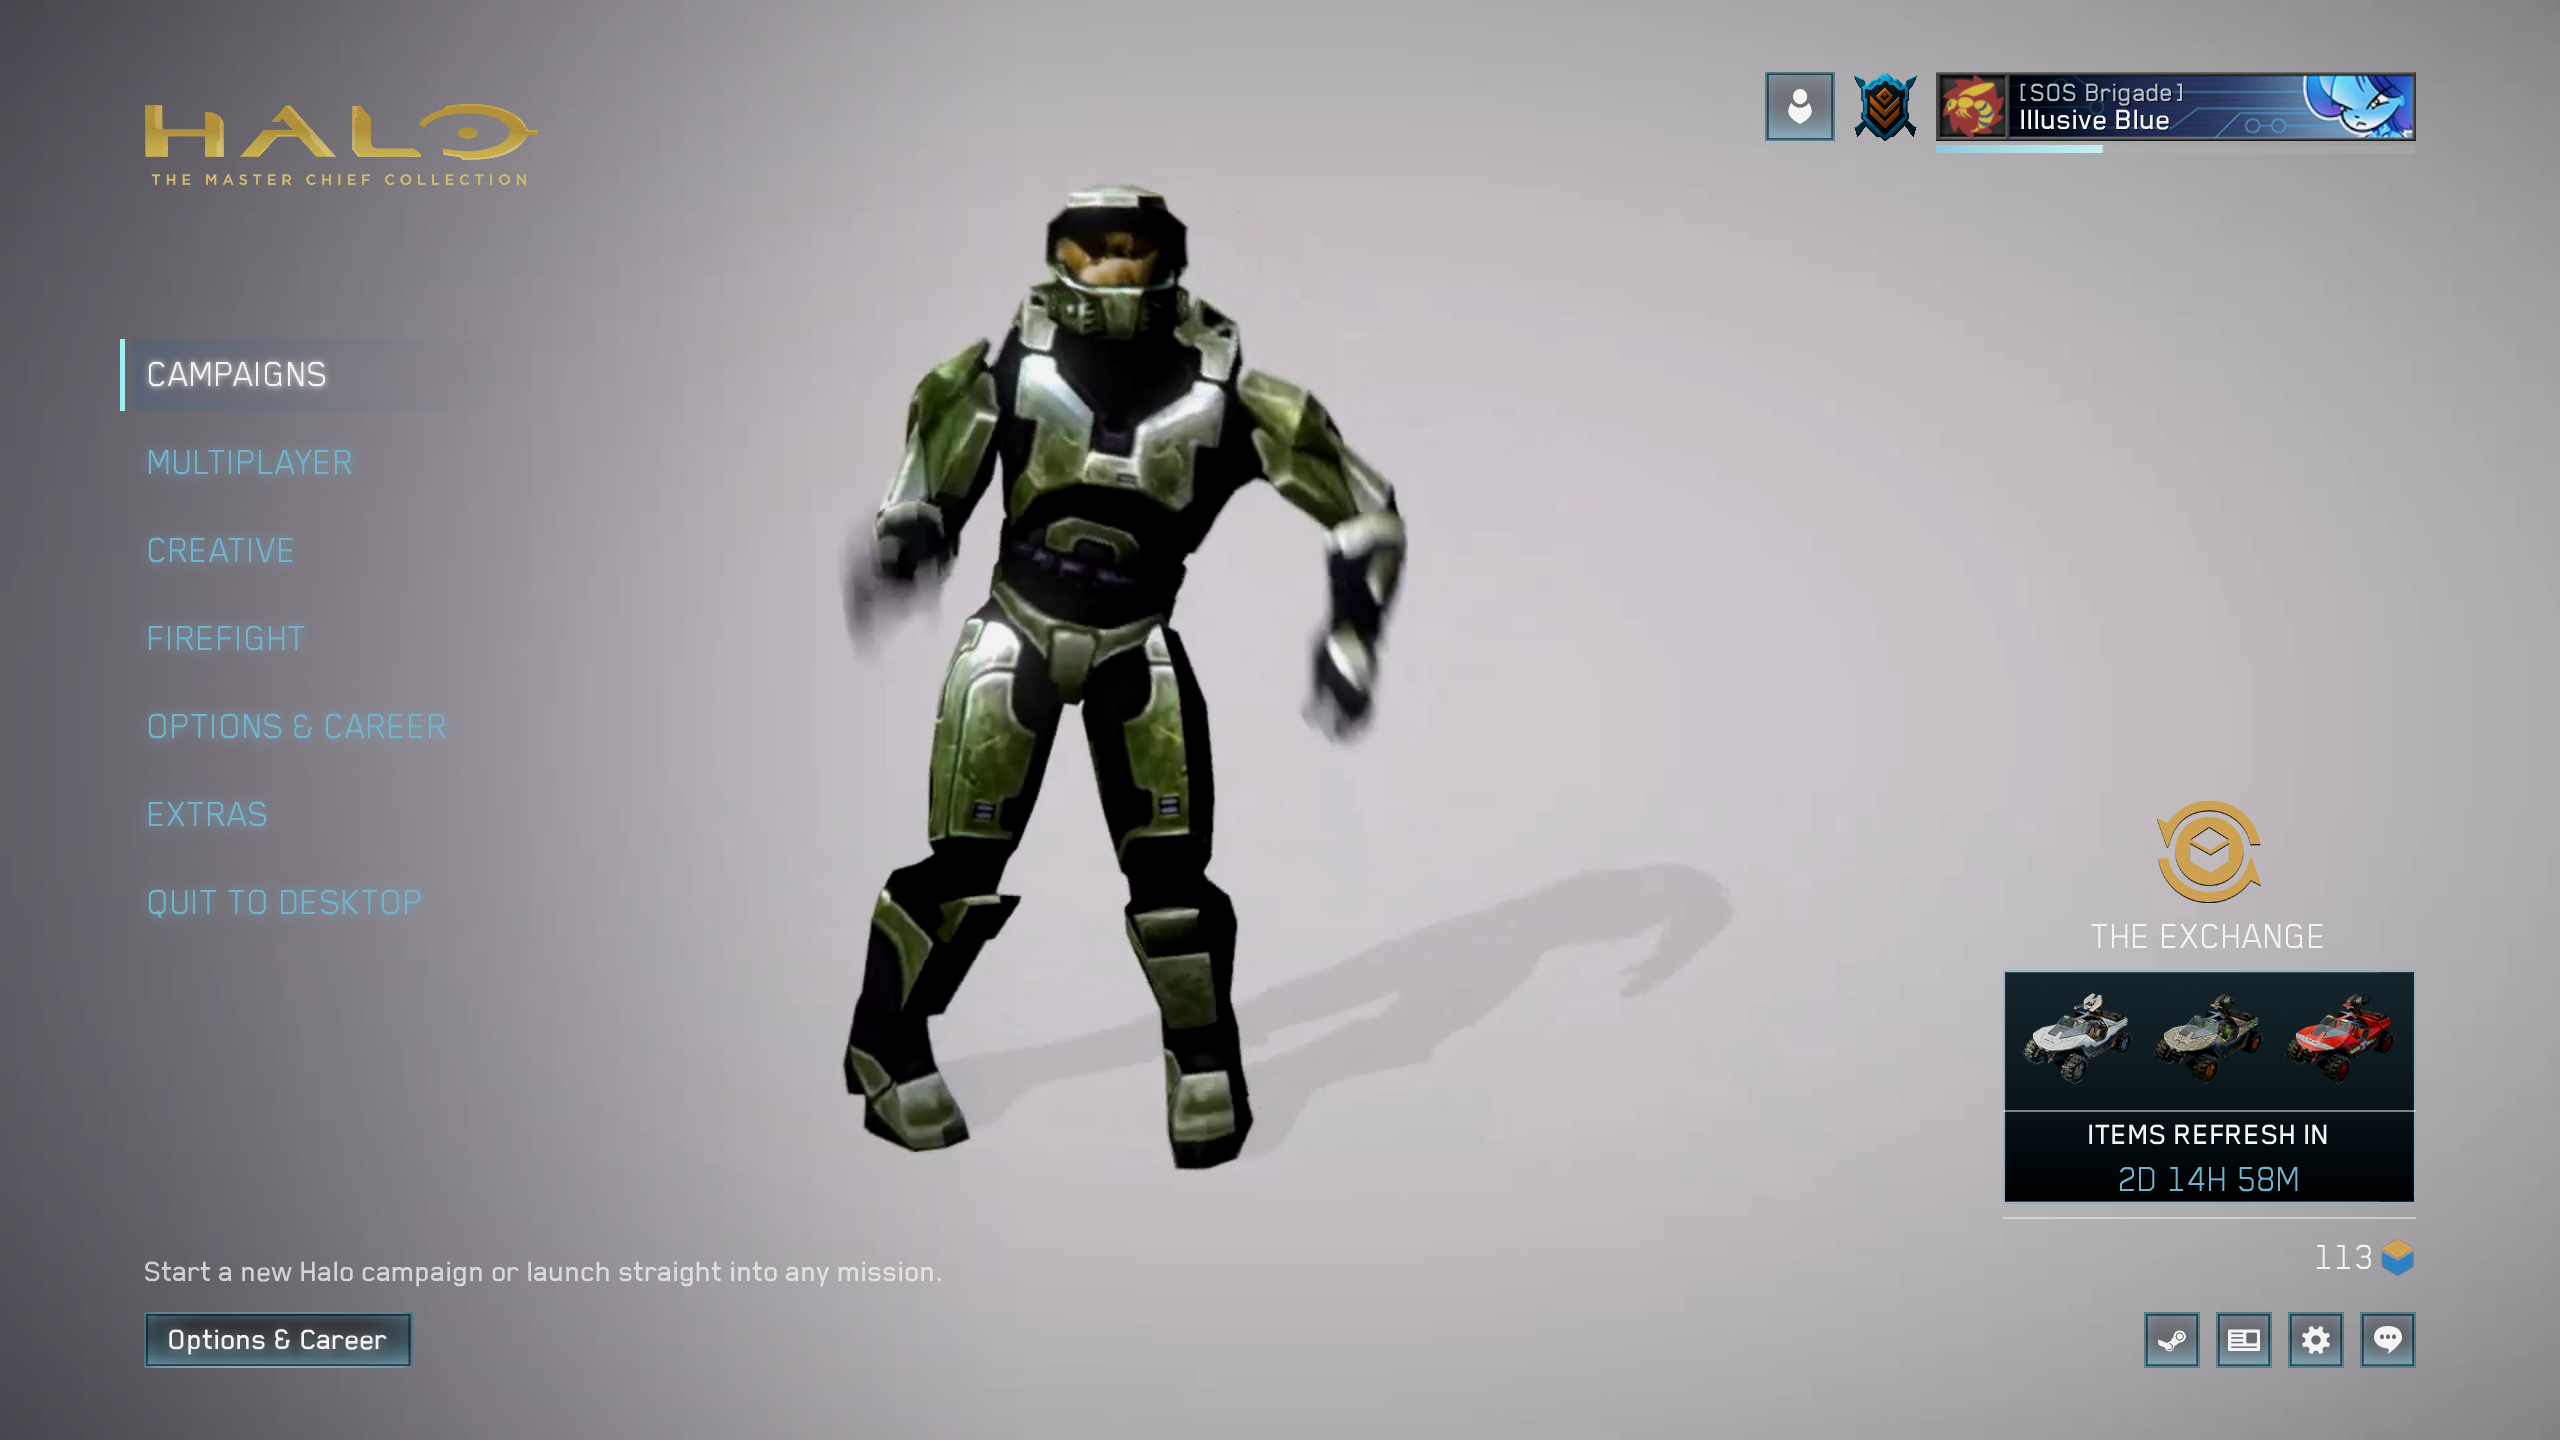 Halo: The Master Chief Collection - How to make a custom background in game - Installing Custom Menu Background - 720A0CD